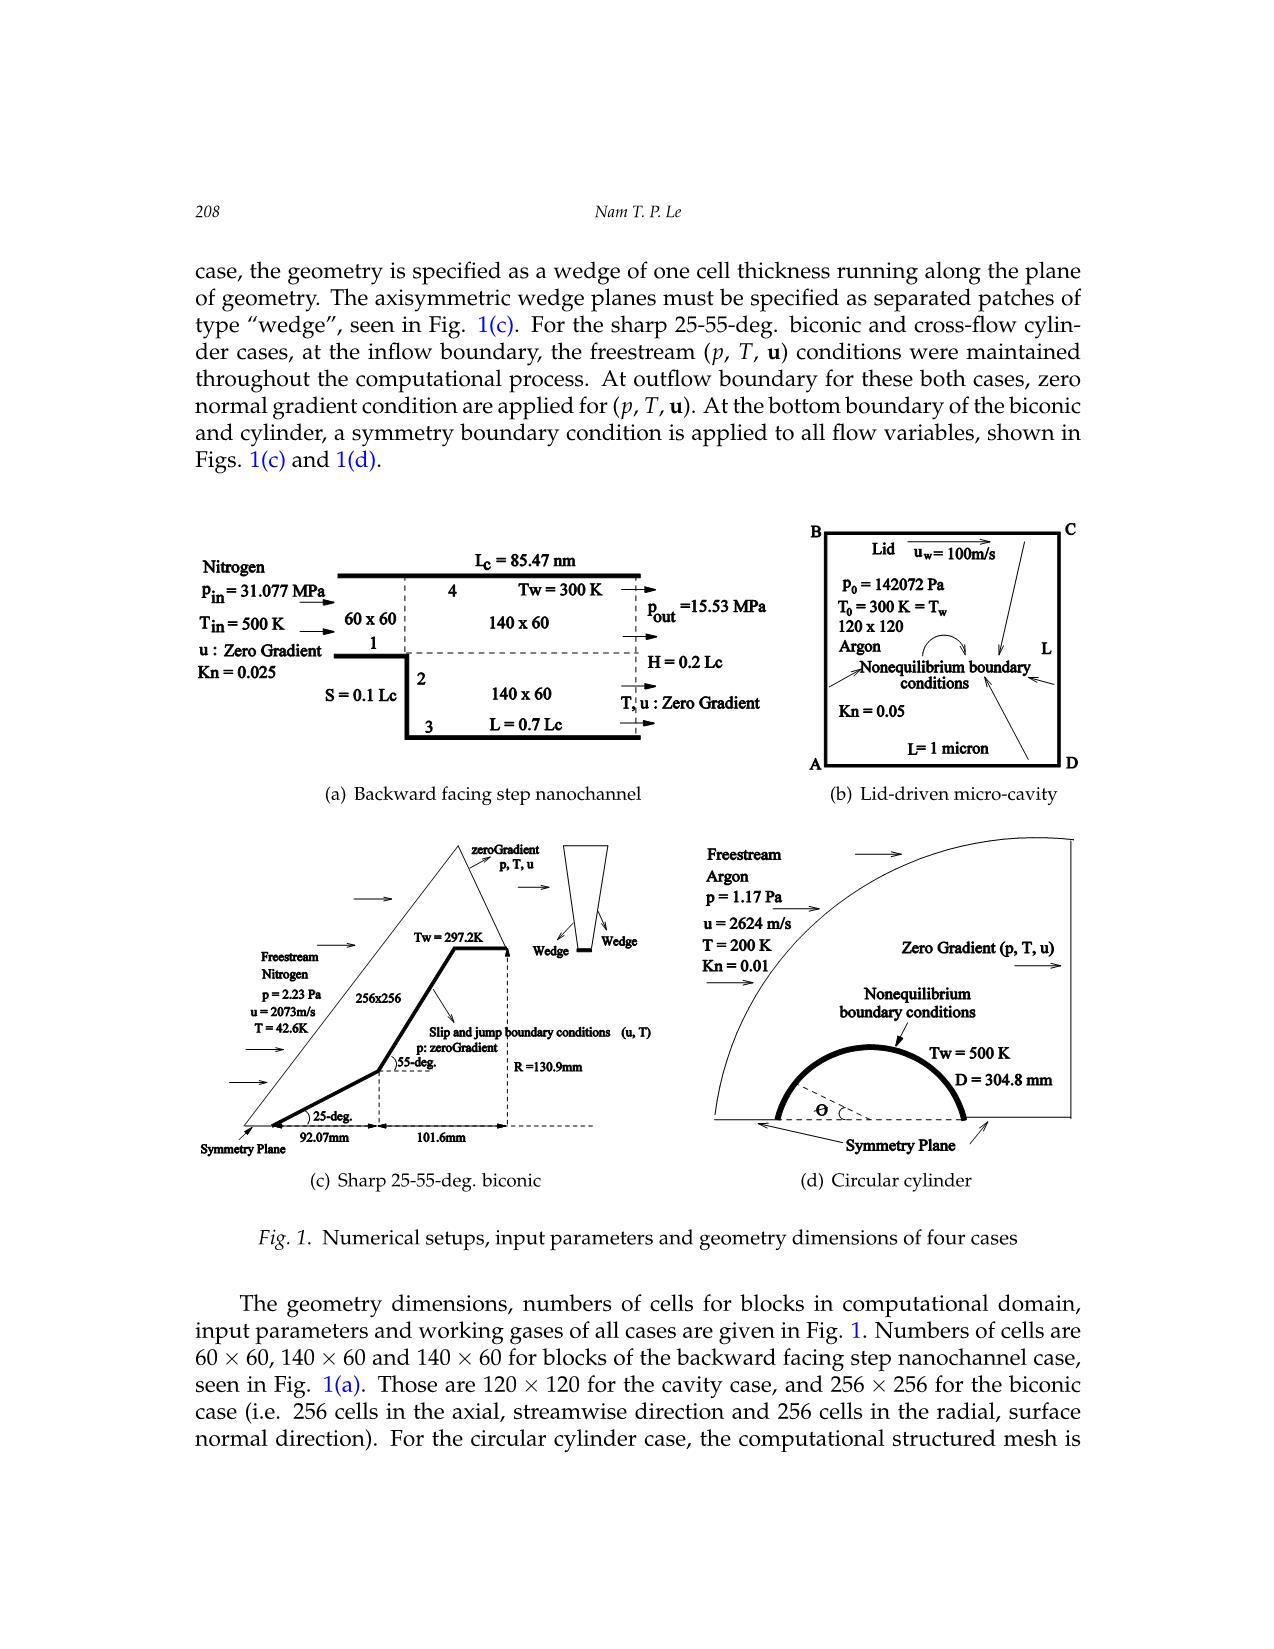 Effect of viscosity on slip boundary conditions in rarefied gas flows trang 6